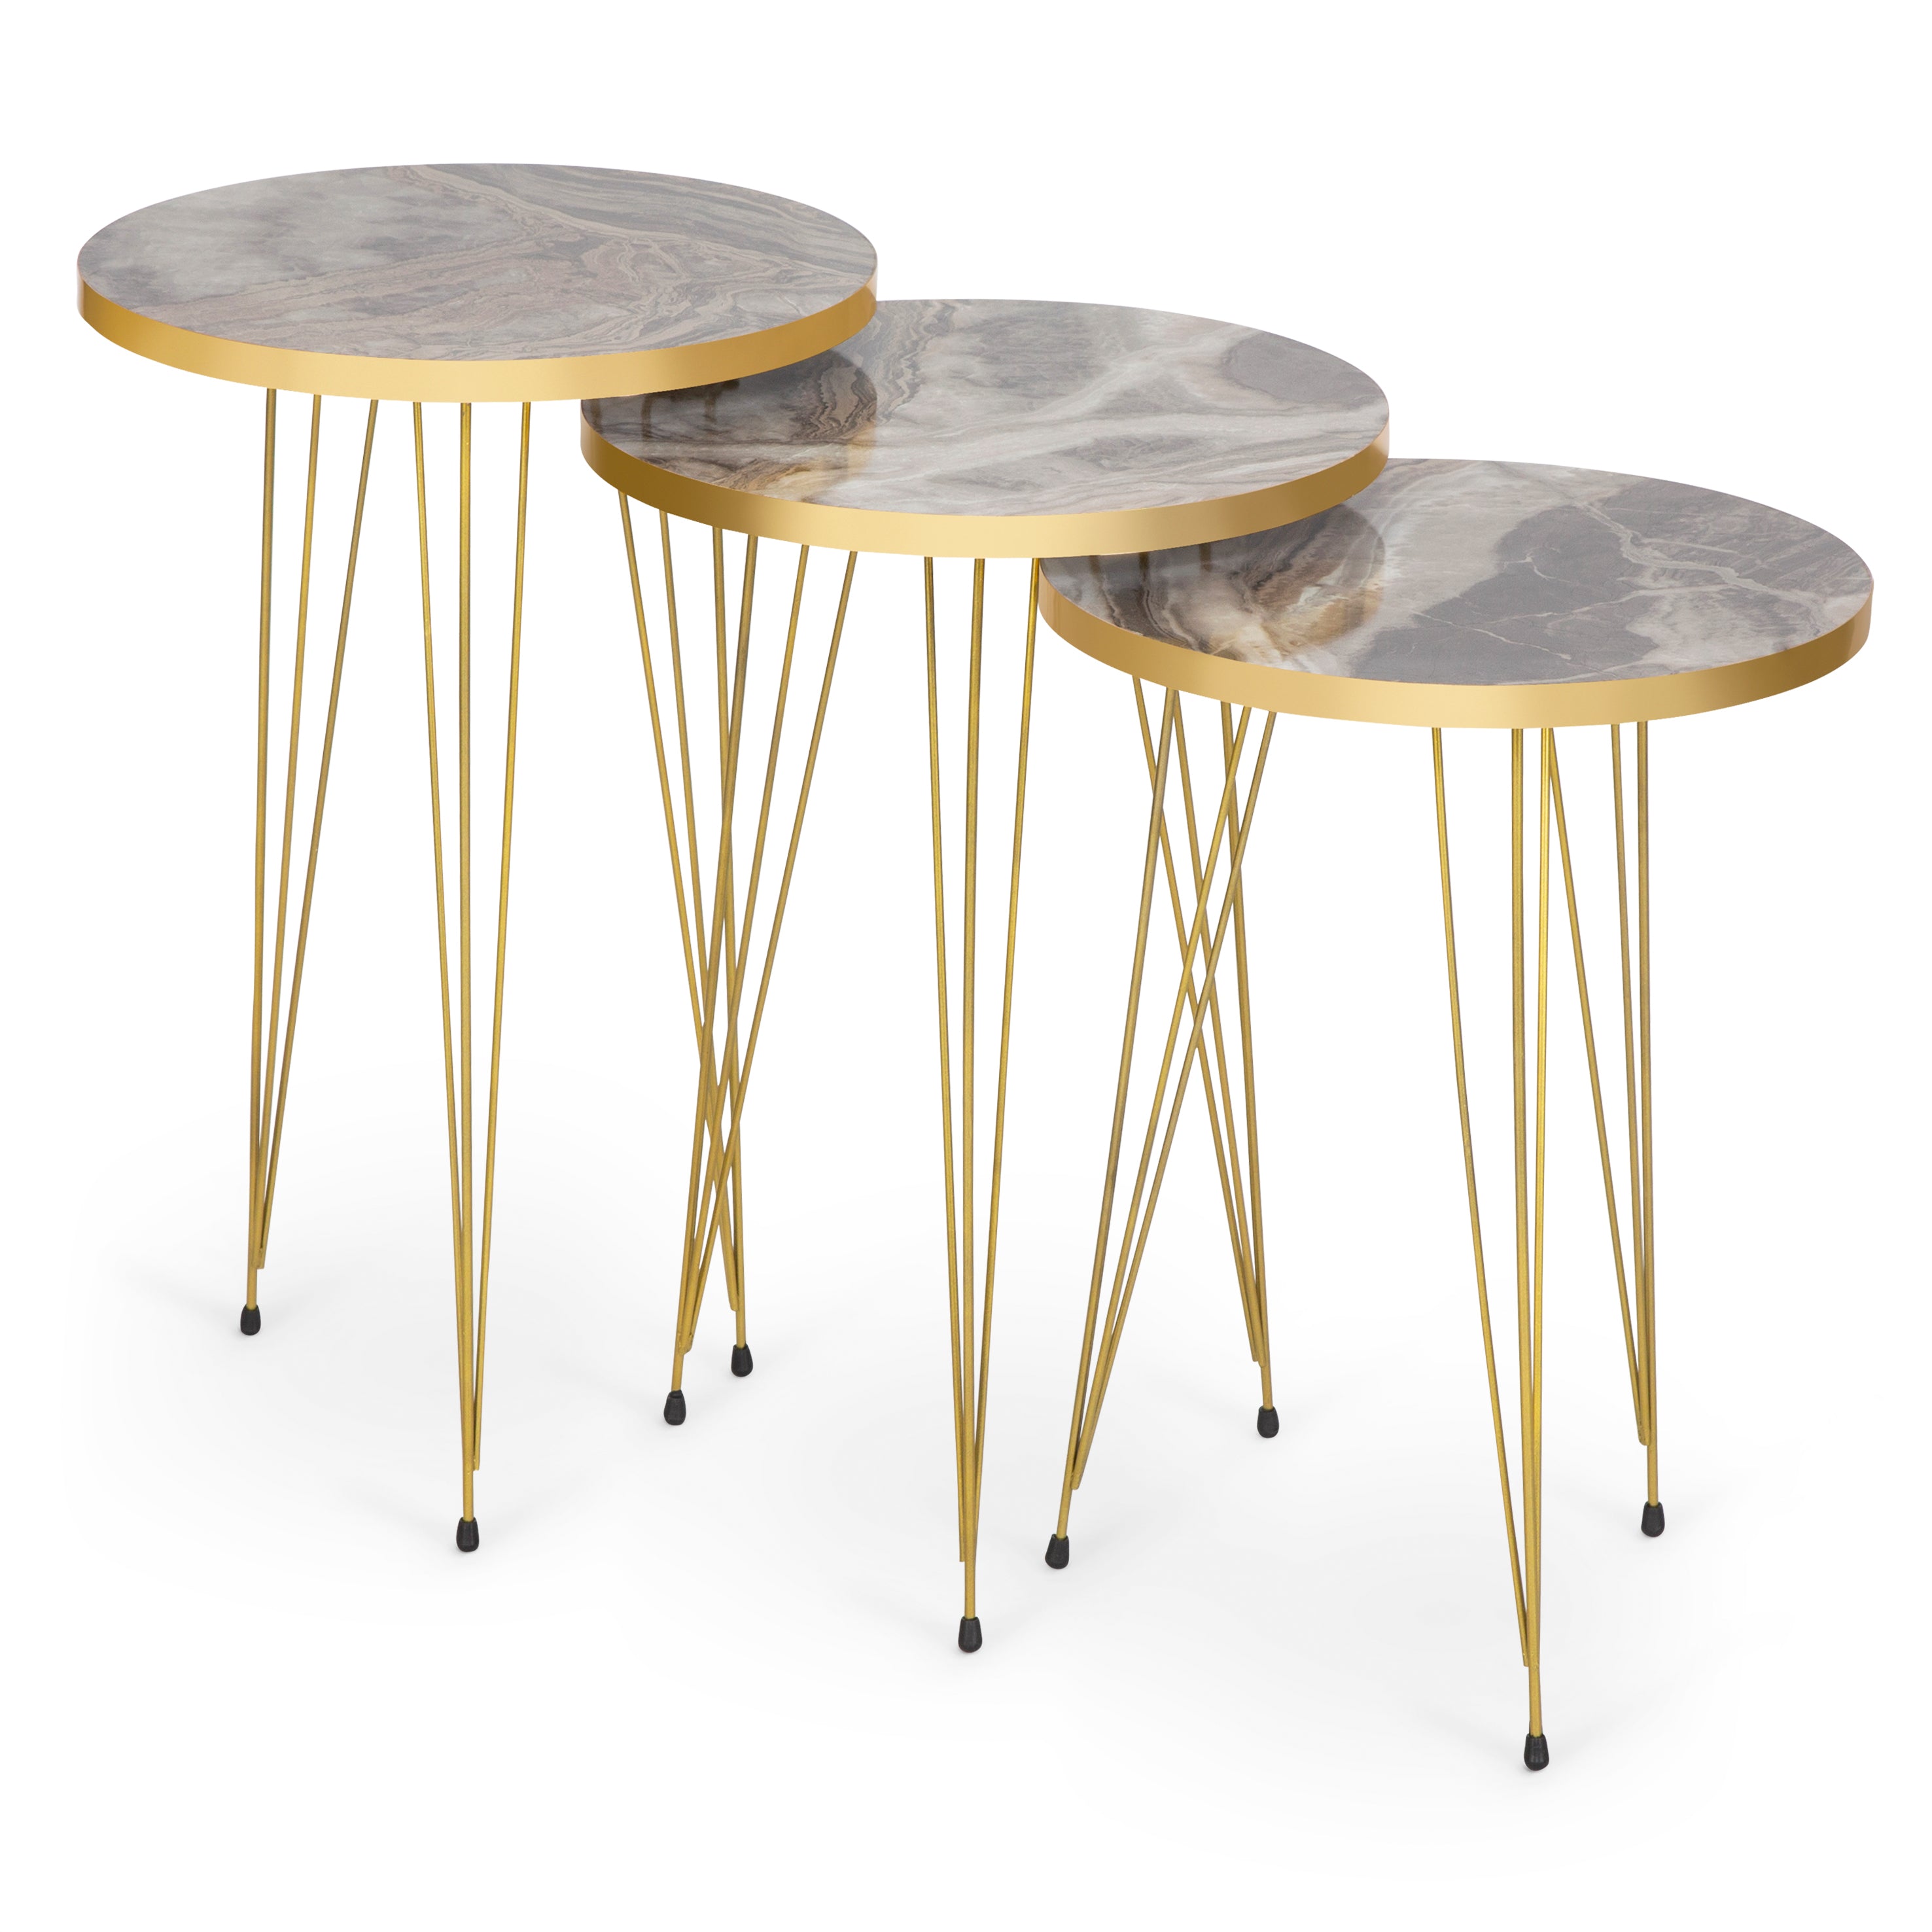 Terek Set of 3 Round Side Tables - Grey Marble & Gold